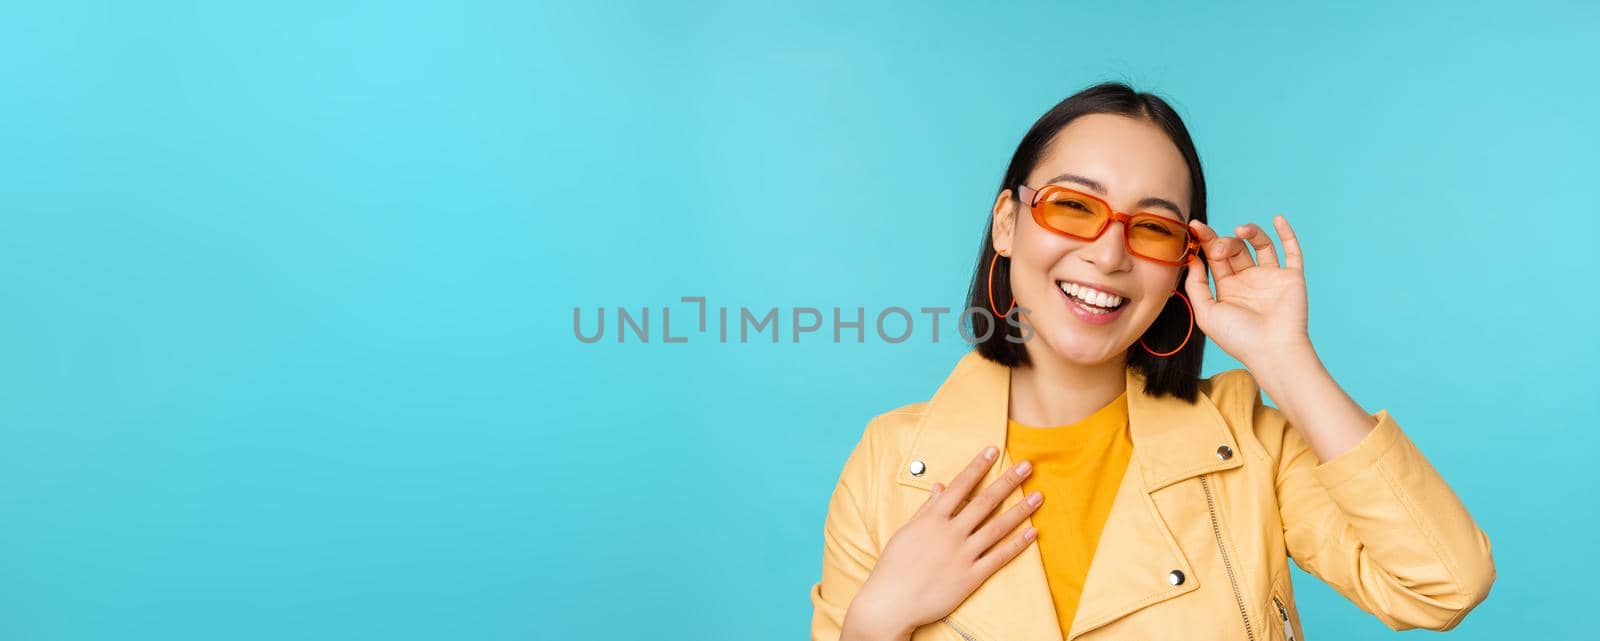 Close up portrait of stylish asian woman in sunglasses, laughing and smiling, looking happy, posing in trendy clothes over blue background.